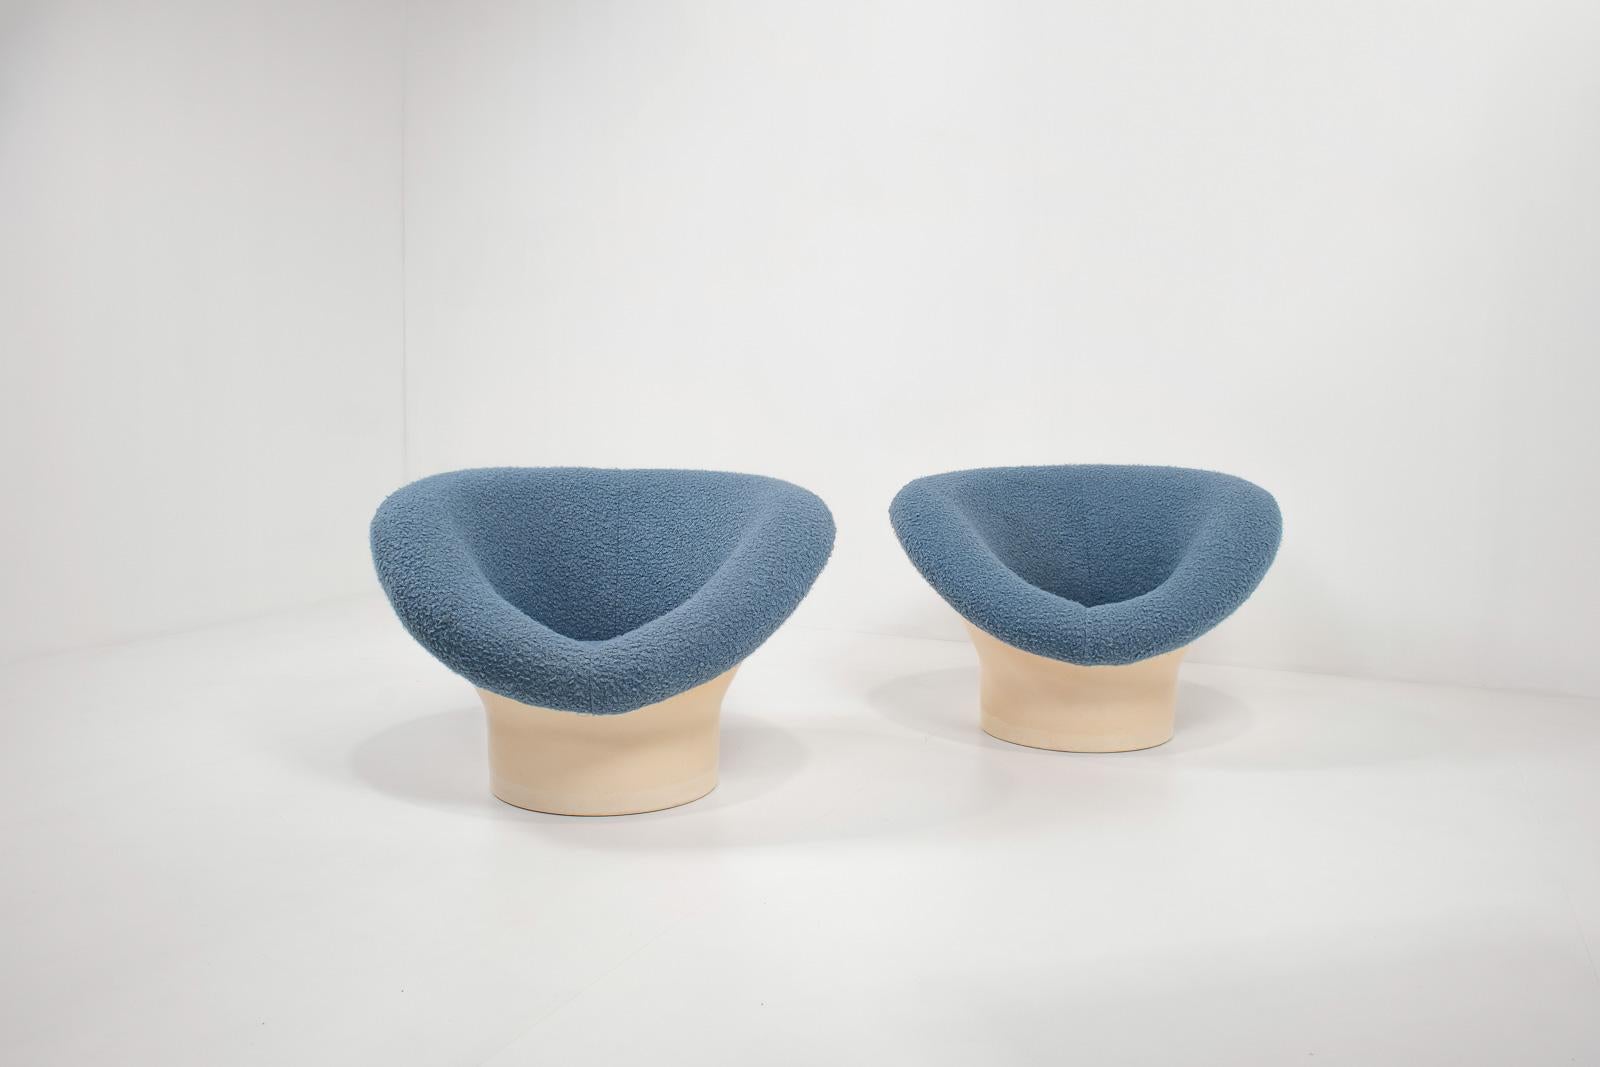 Very groovy chairs that are a real statement piece and give a space age vibe. 
Designed late 1960s by Swedish designer Lennart Bender for Ulferts AB. 

The chairs have been reupholstered in a blue bouclé fabric, and the shell is made of